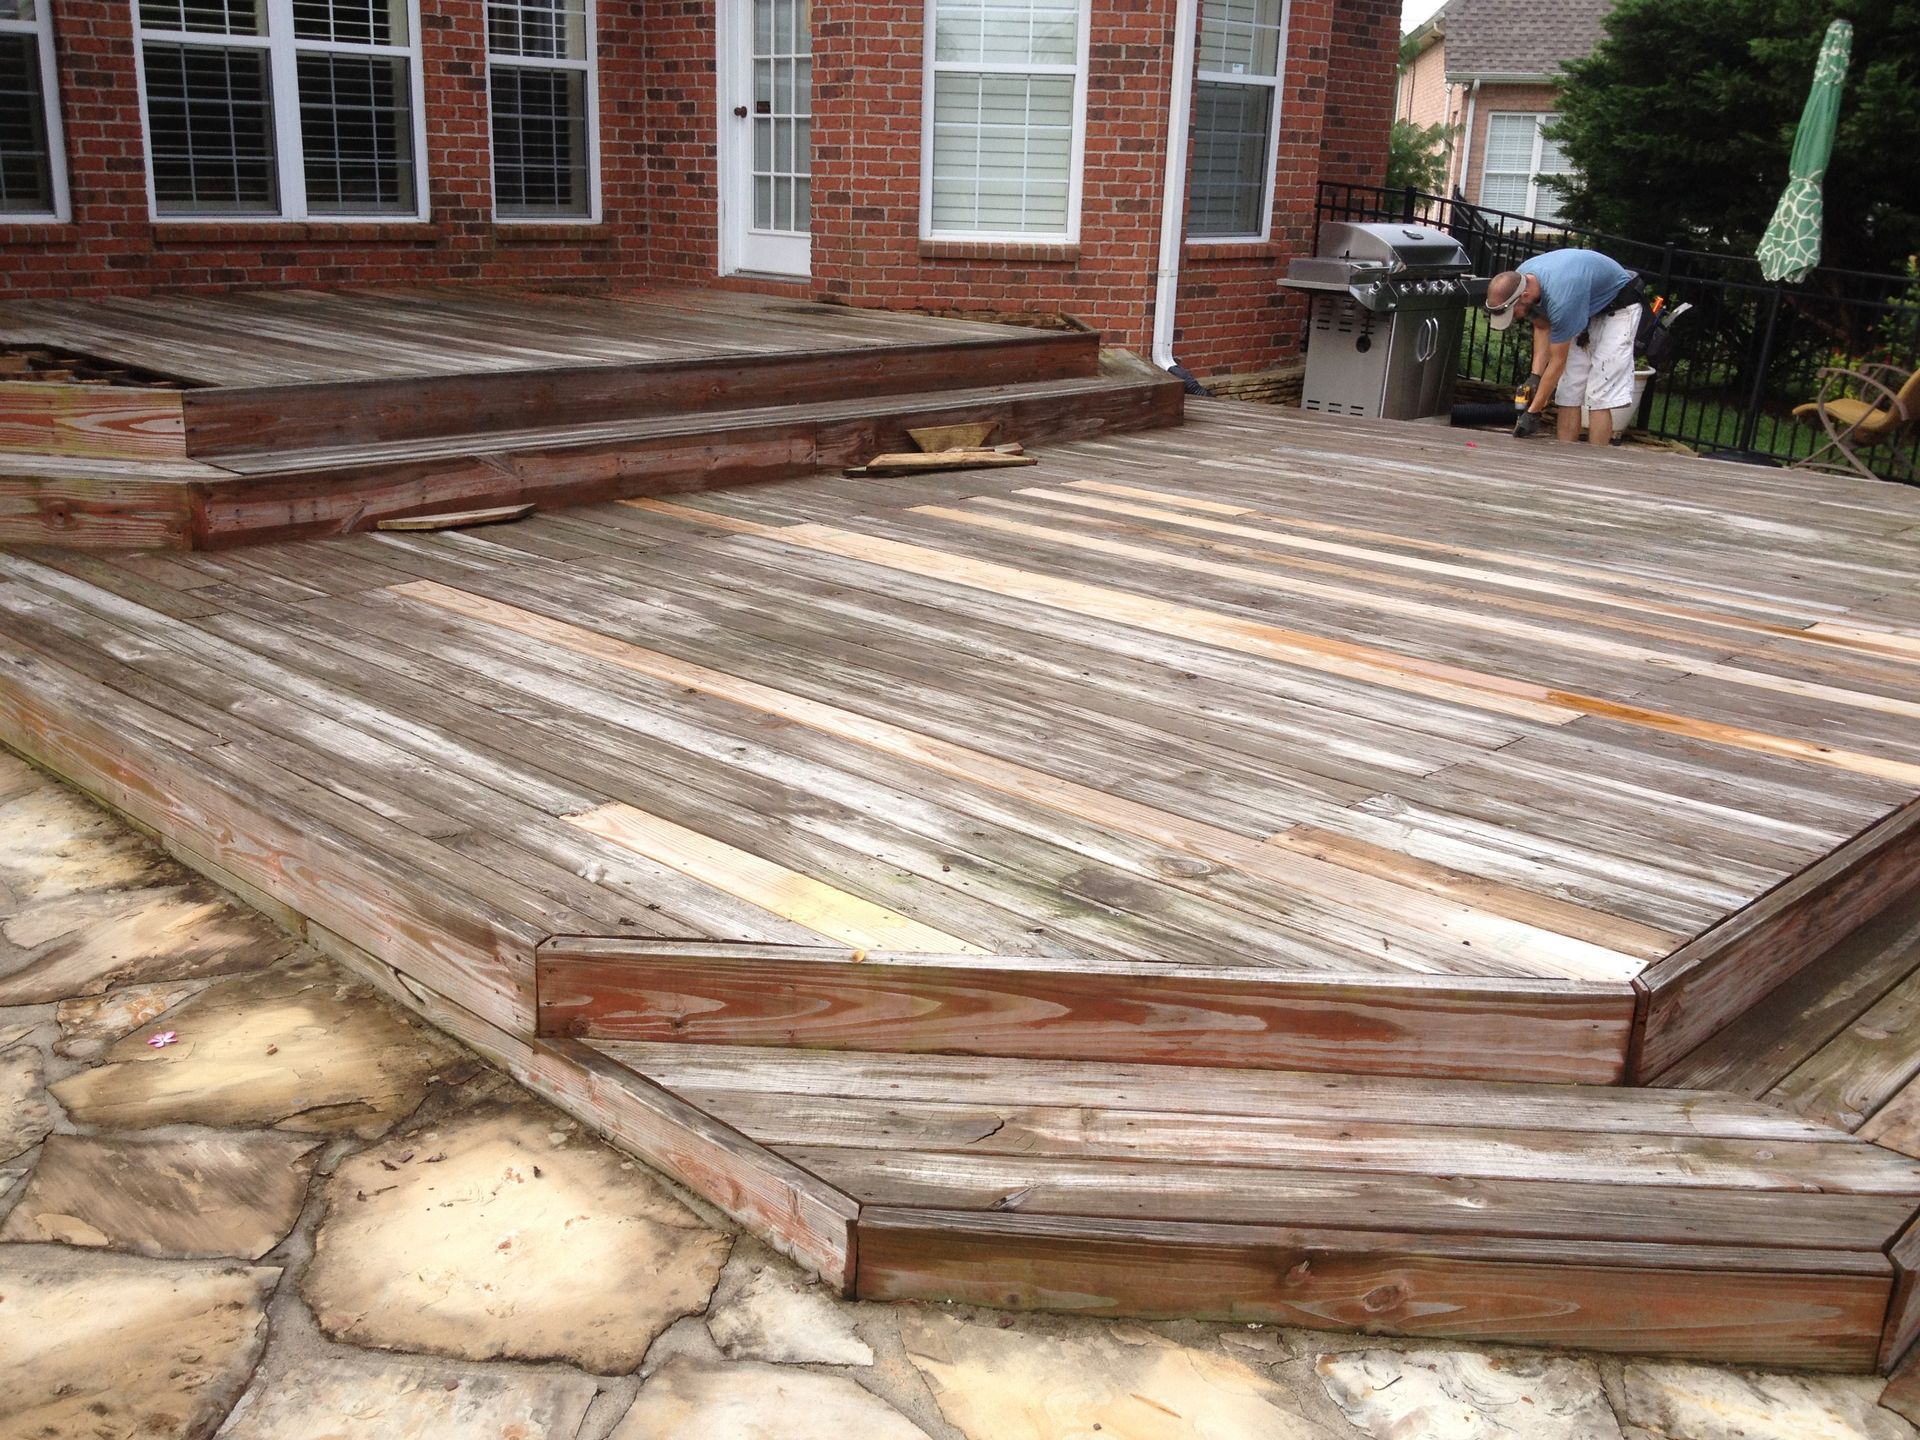 Before Expert Deck Services